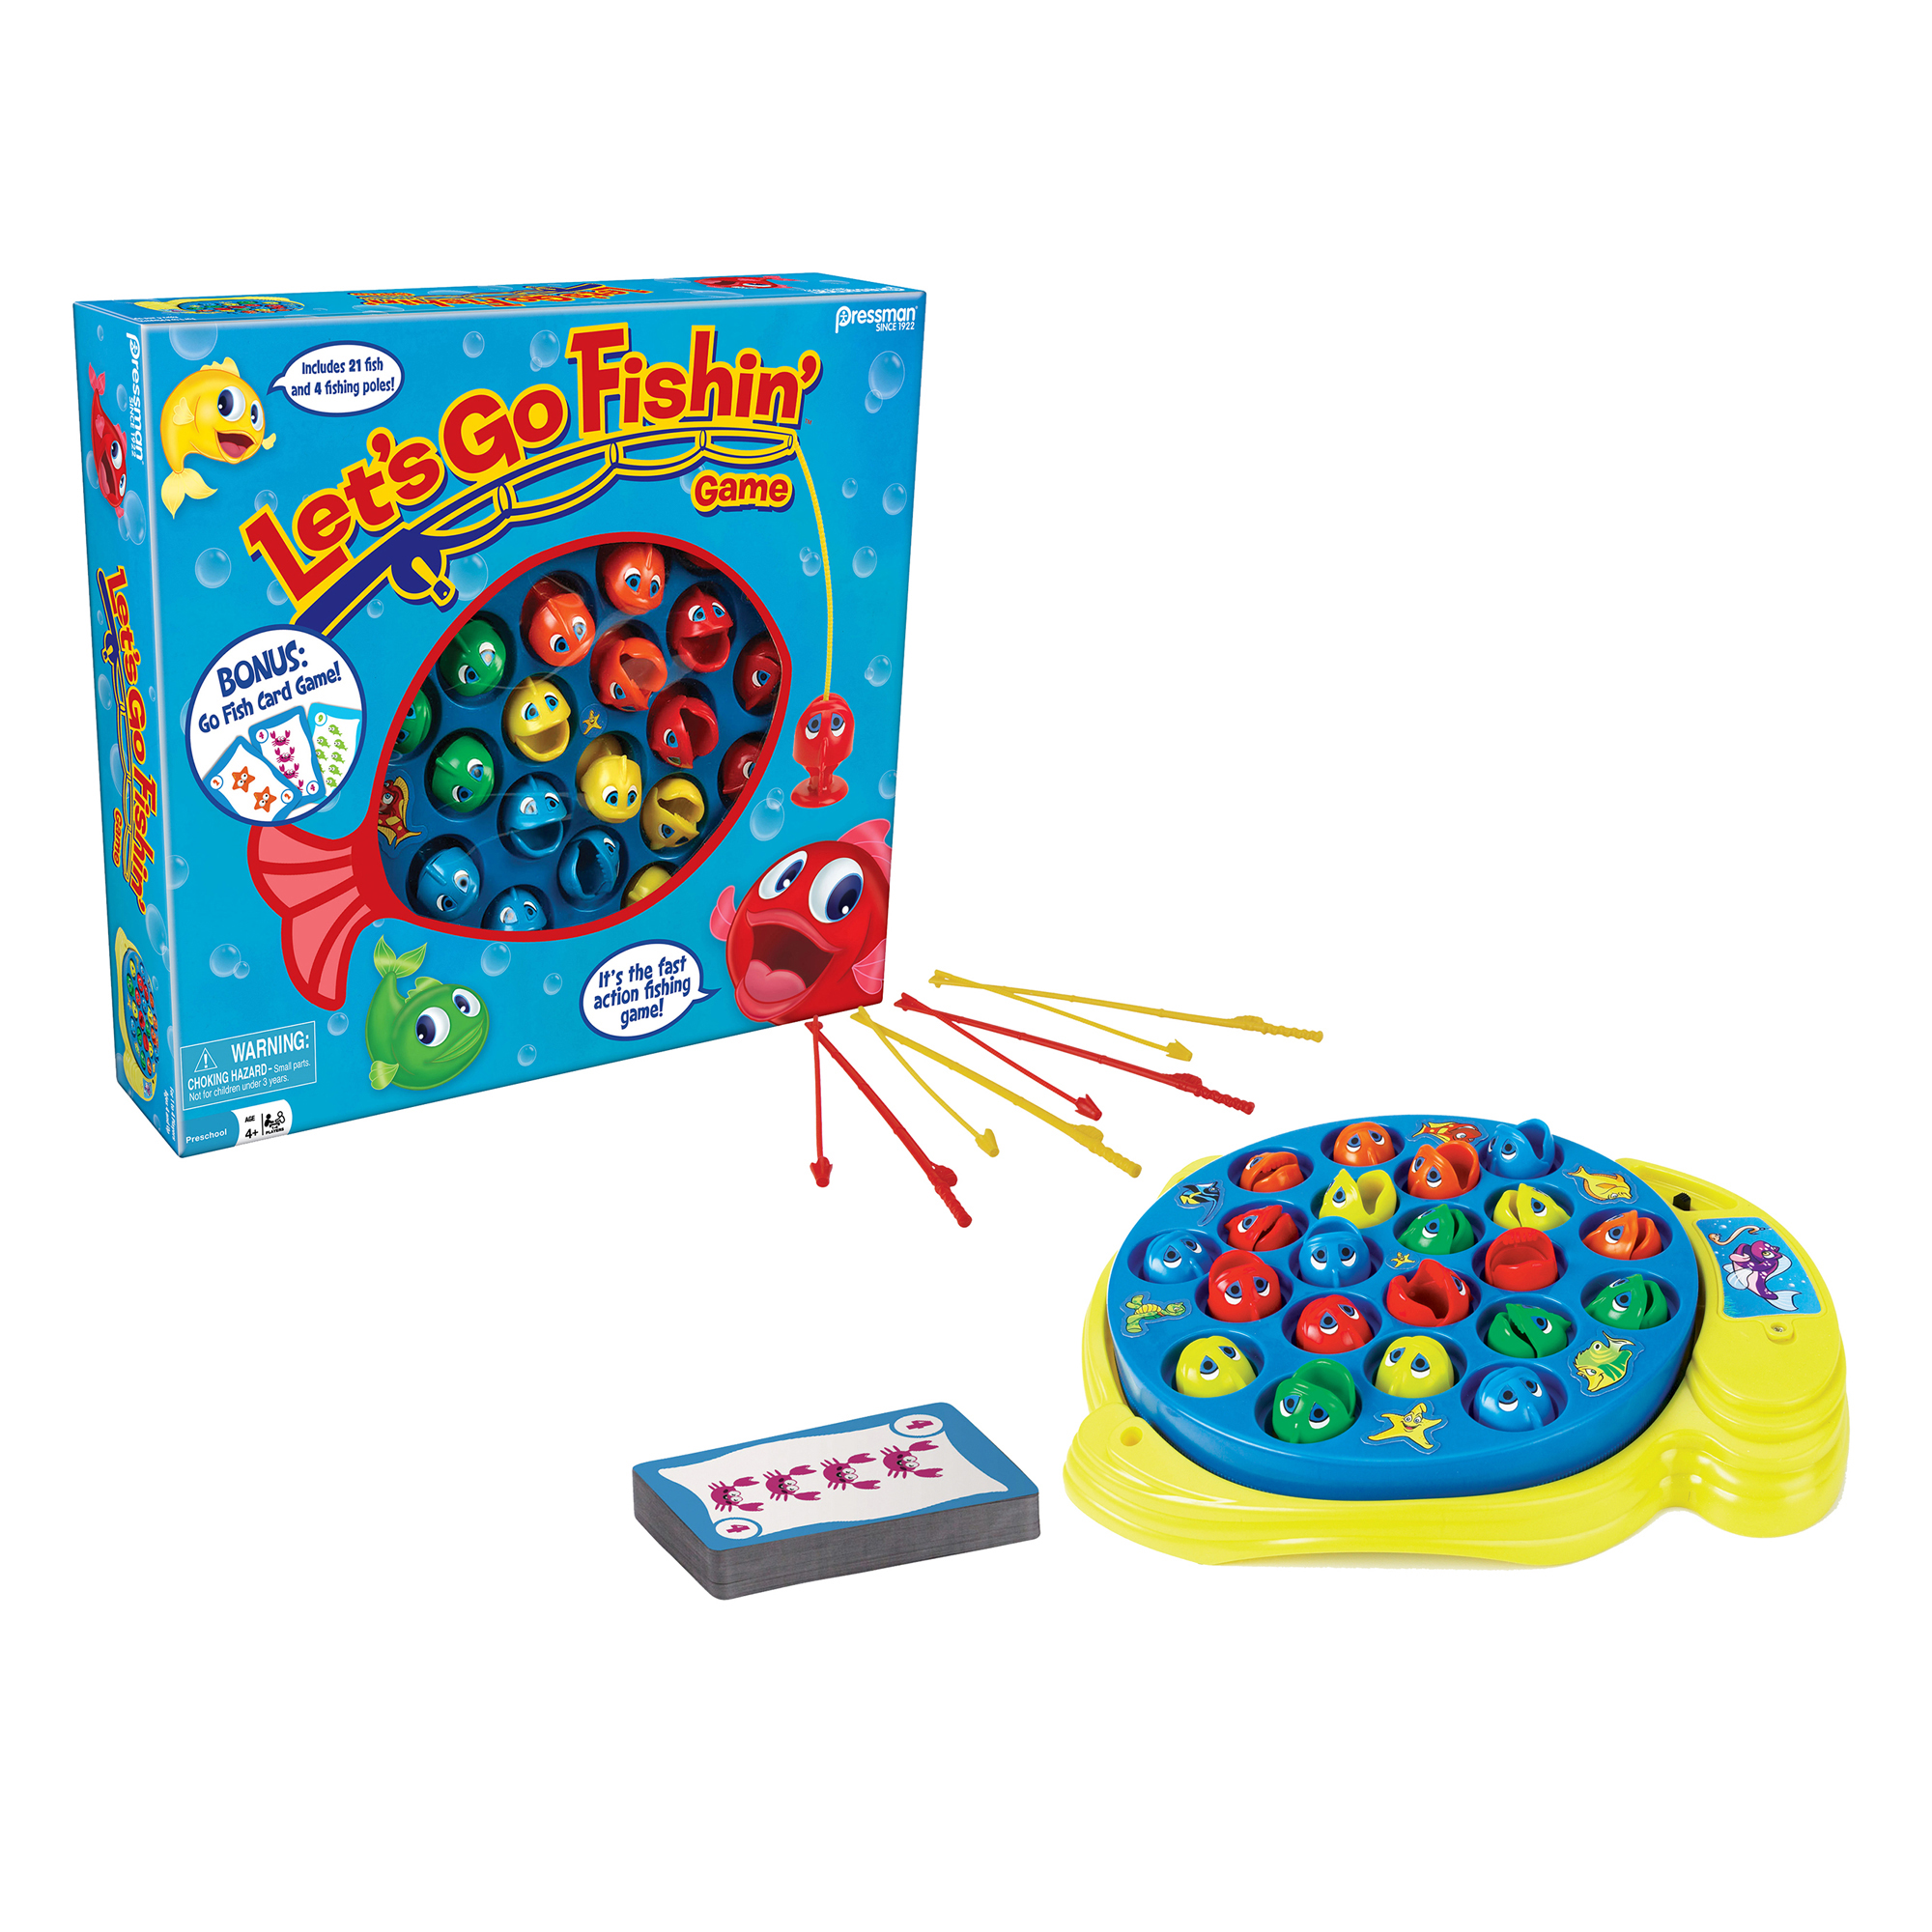 Pressman Toy Let's Go Fishin' and Go Fish Card Combo Game